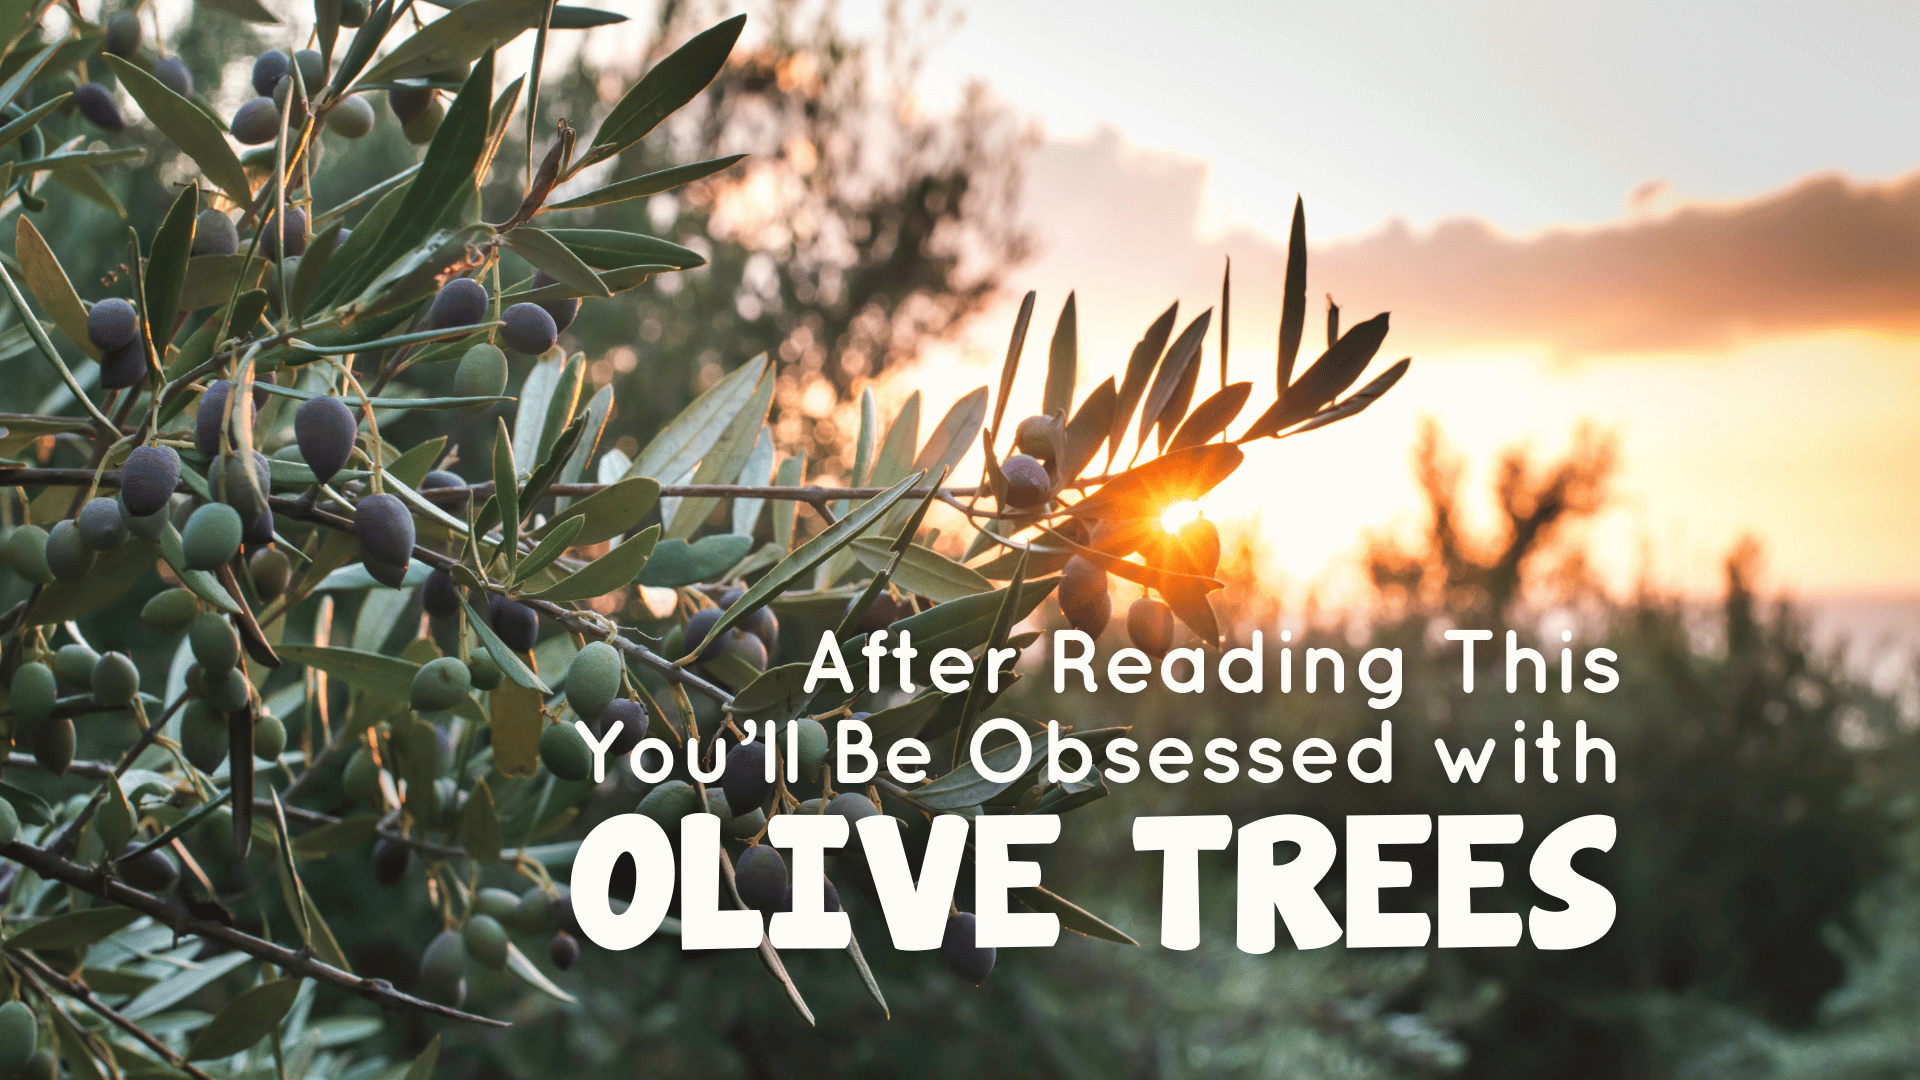 Olive branches with ripe olives against a sunset, with text overlay stating "after planting this in your garden, you'll be obsessed with olive trees.